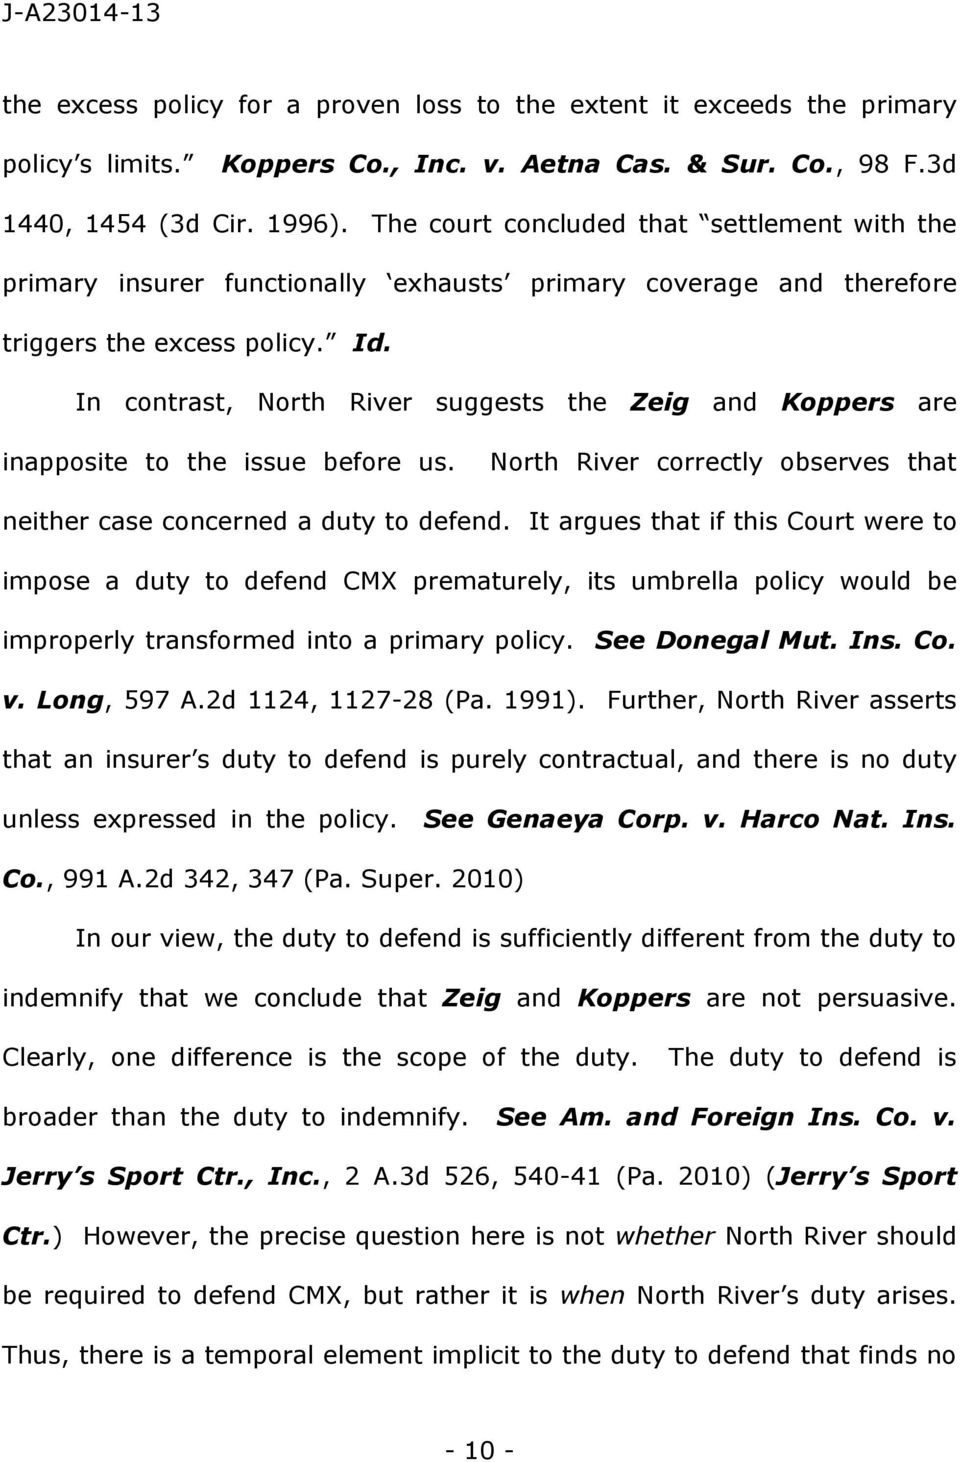 In contrast, North River suggests the Zeig and Koppers are inapposite to the issue before us. North River correctly observes that neither case concerned a duty to defend.